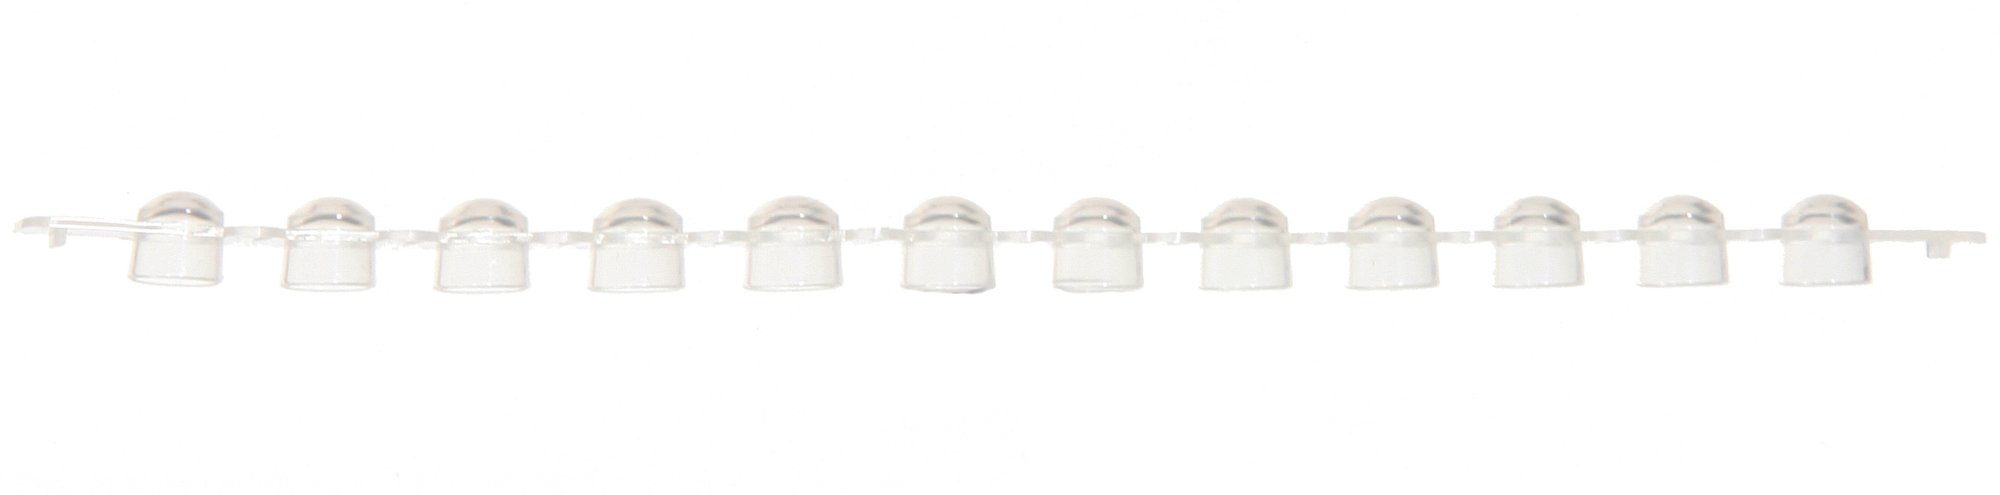 Strip Caps for 0.2mL Micro Reaction Tubes - 12 Caps/Strip - Natural (Pack of 200)